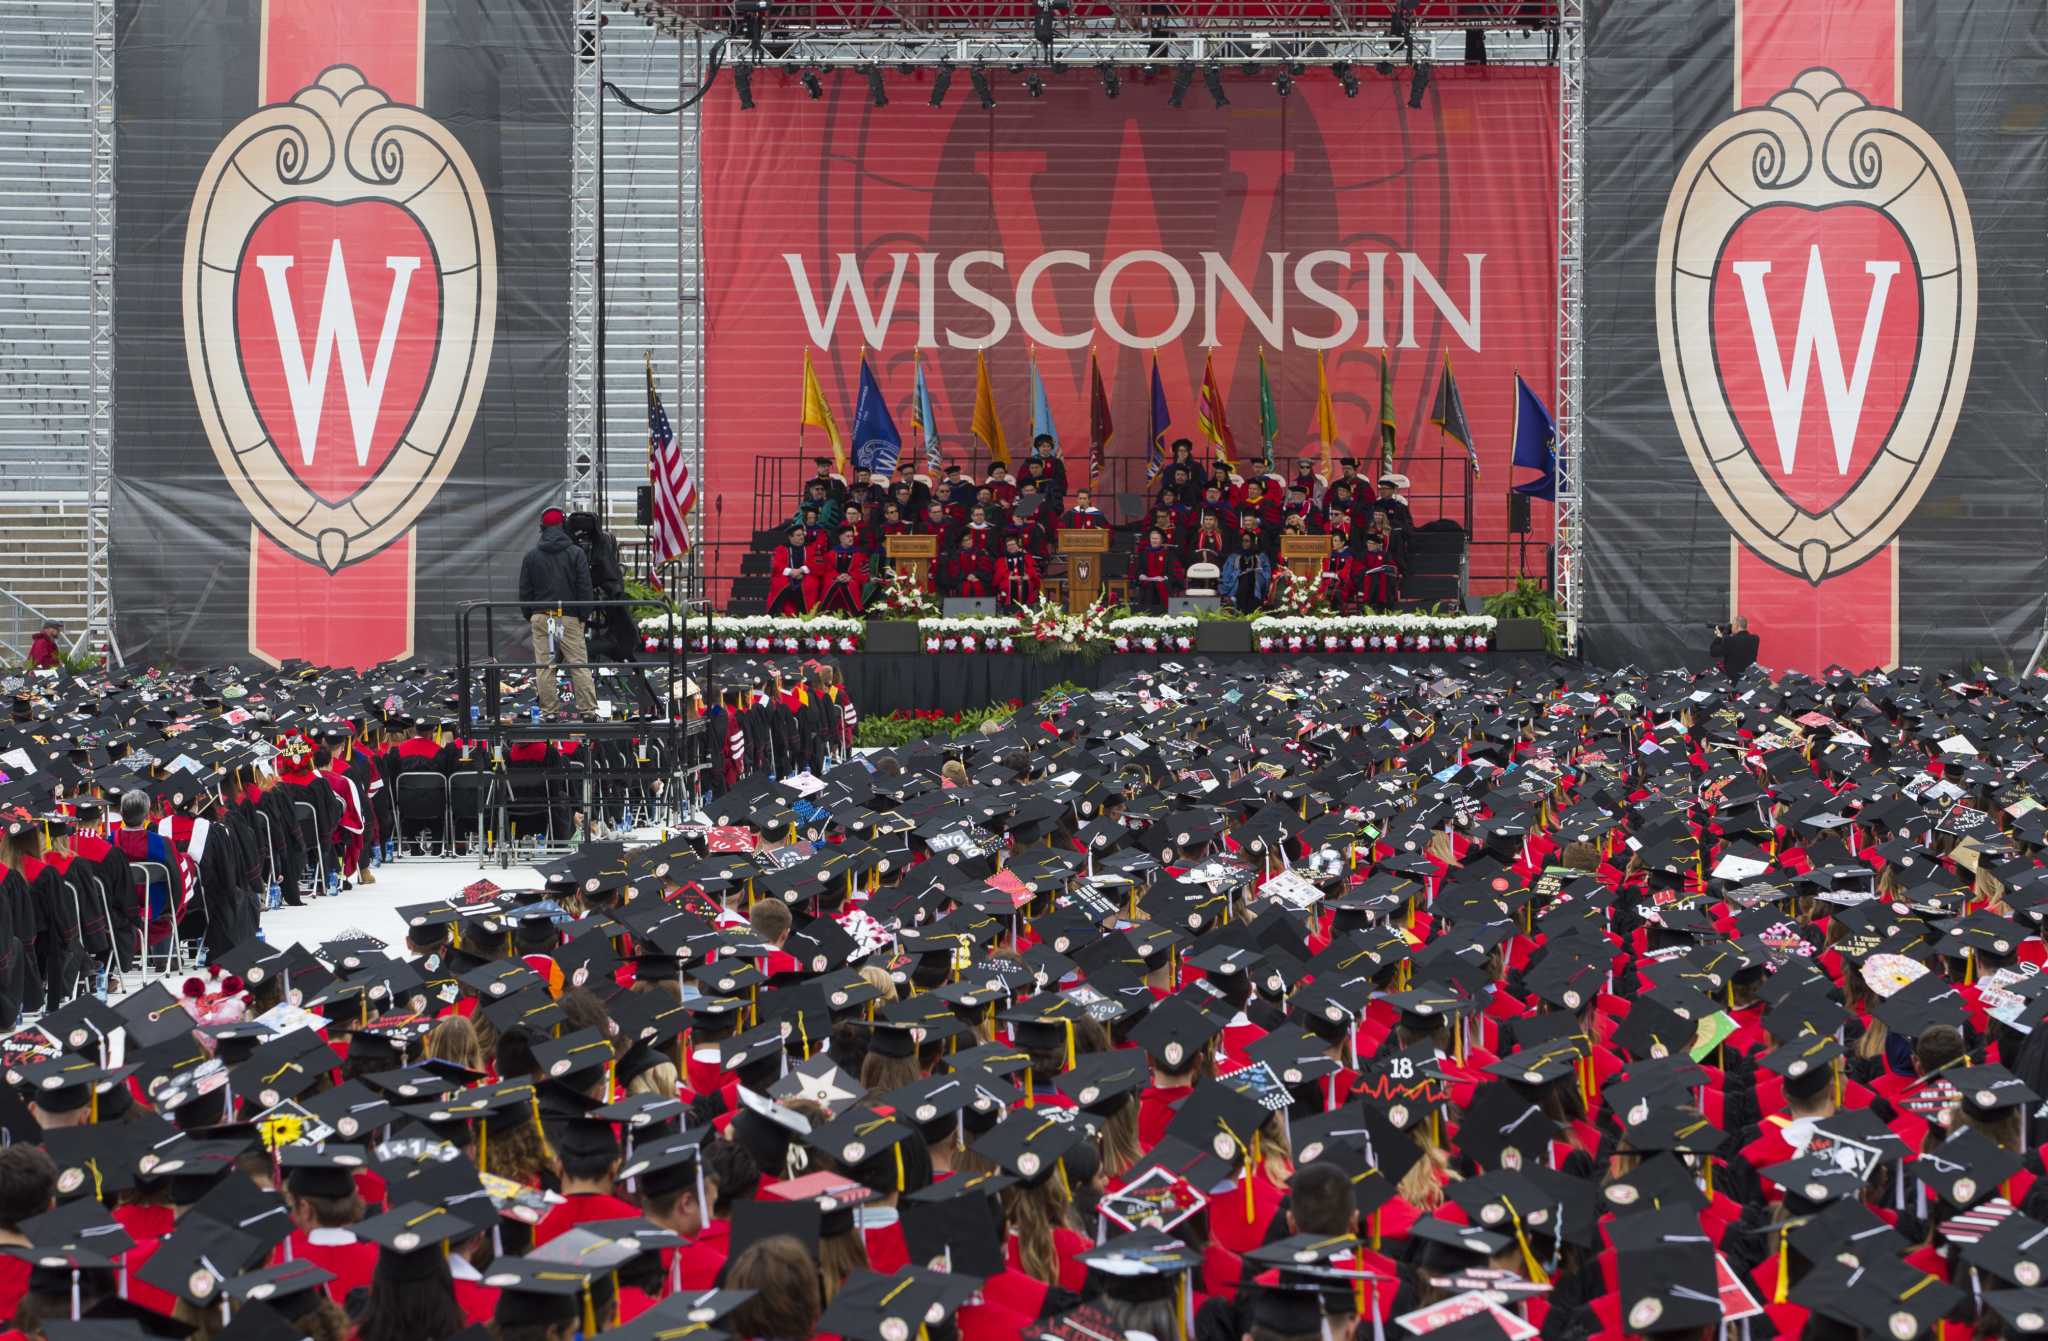 Tuition increase approved for University of Wisconsin-Madison, other campuses